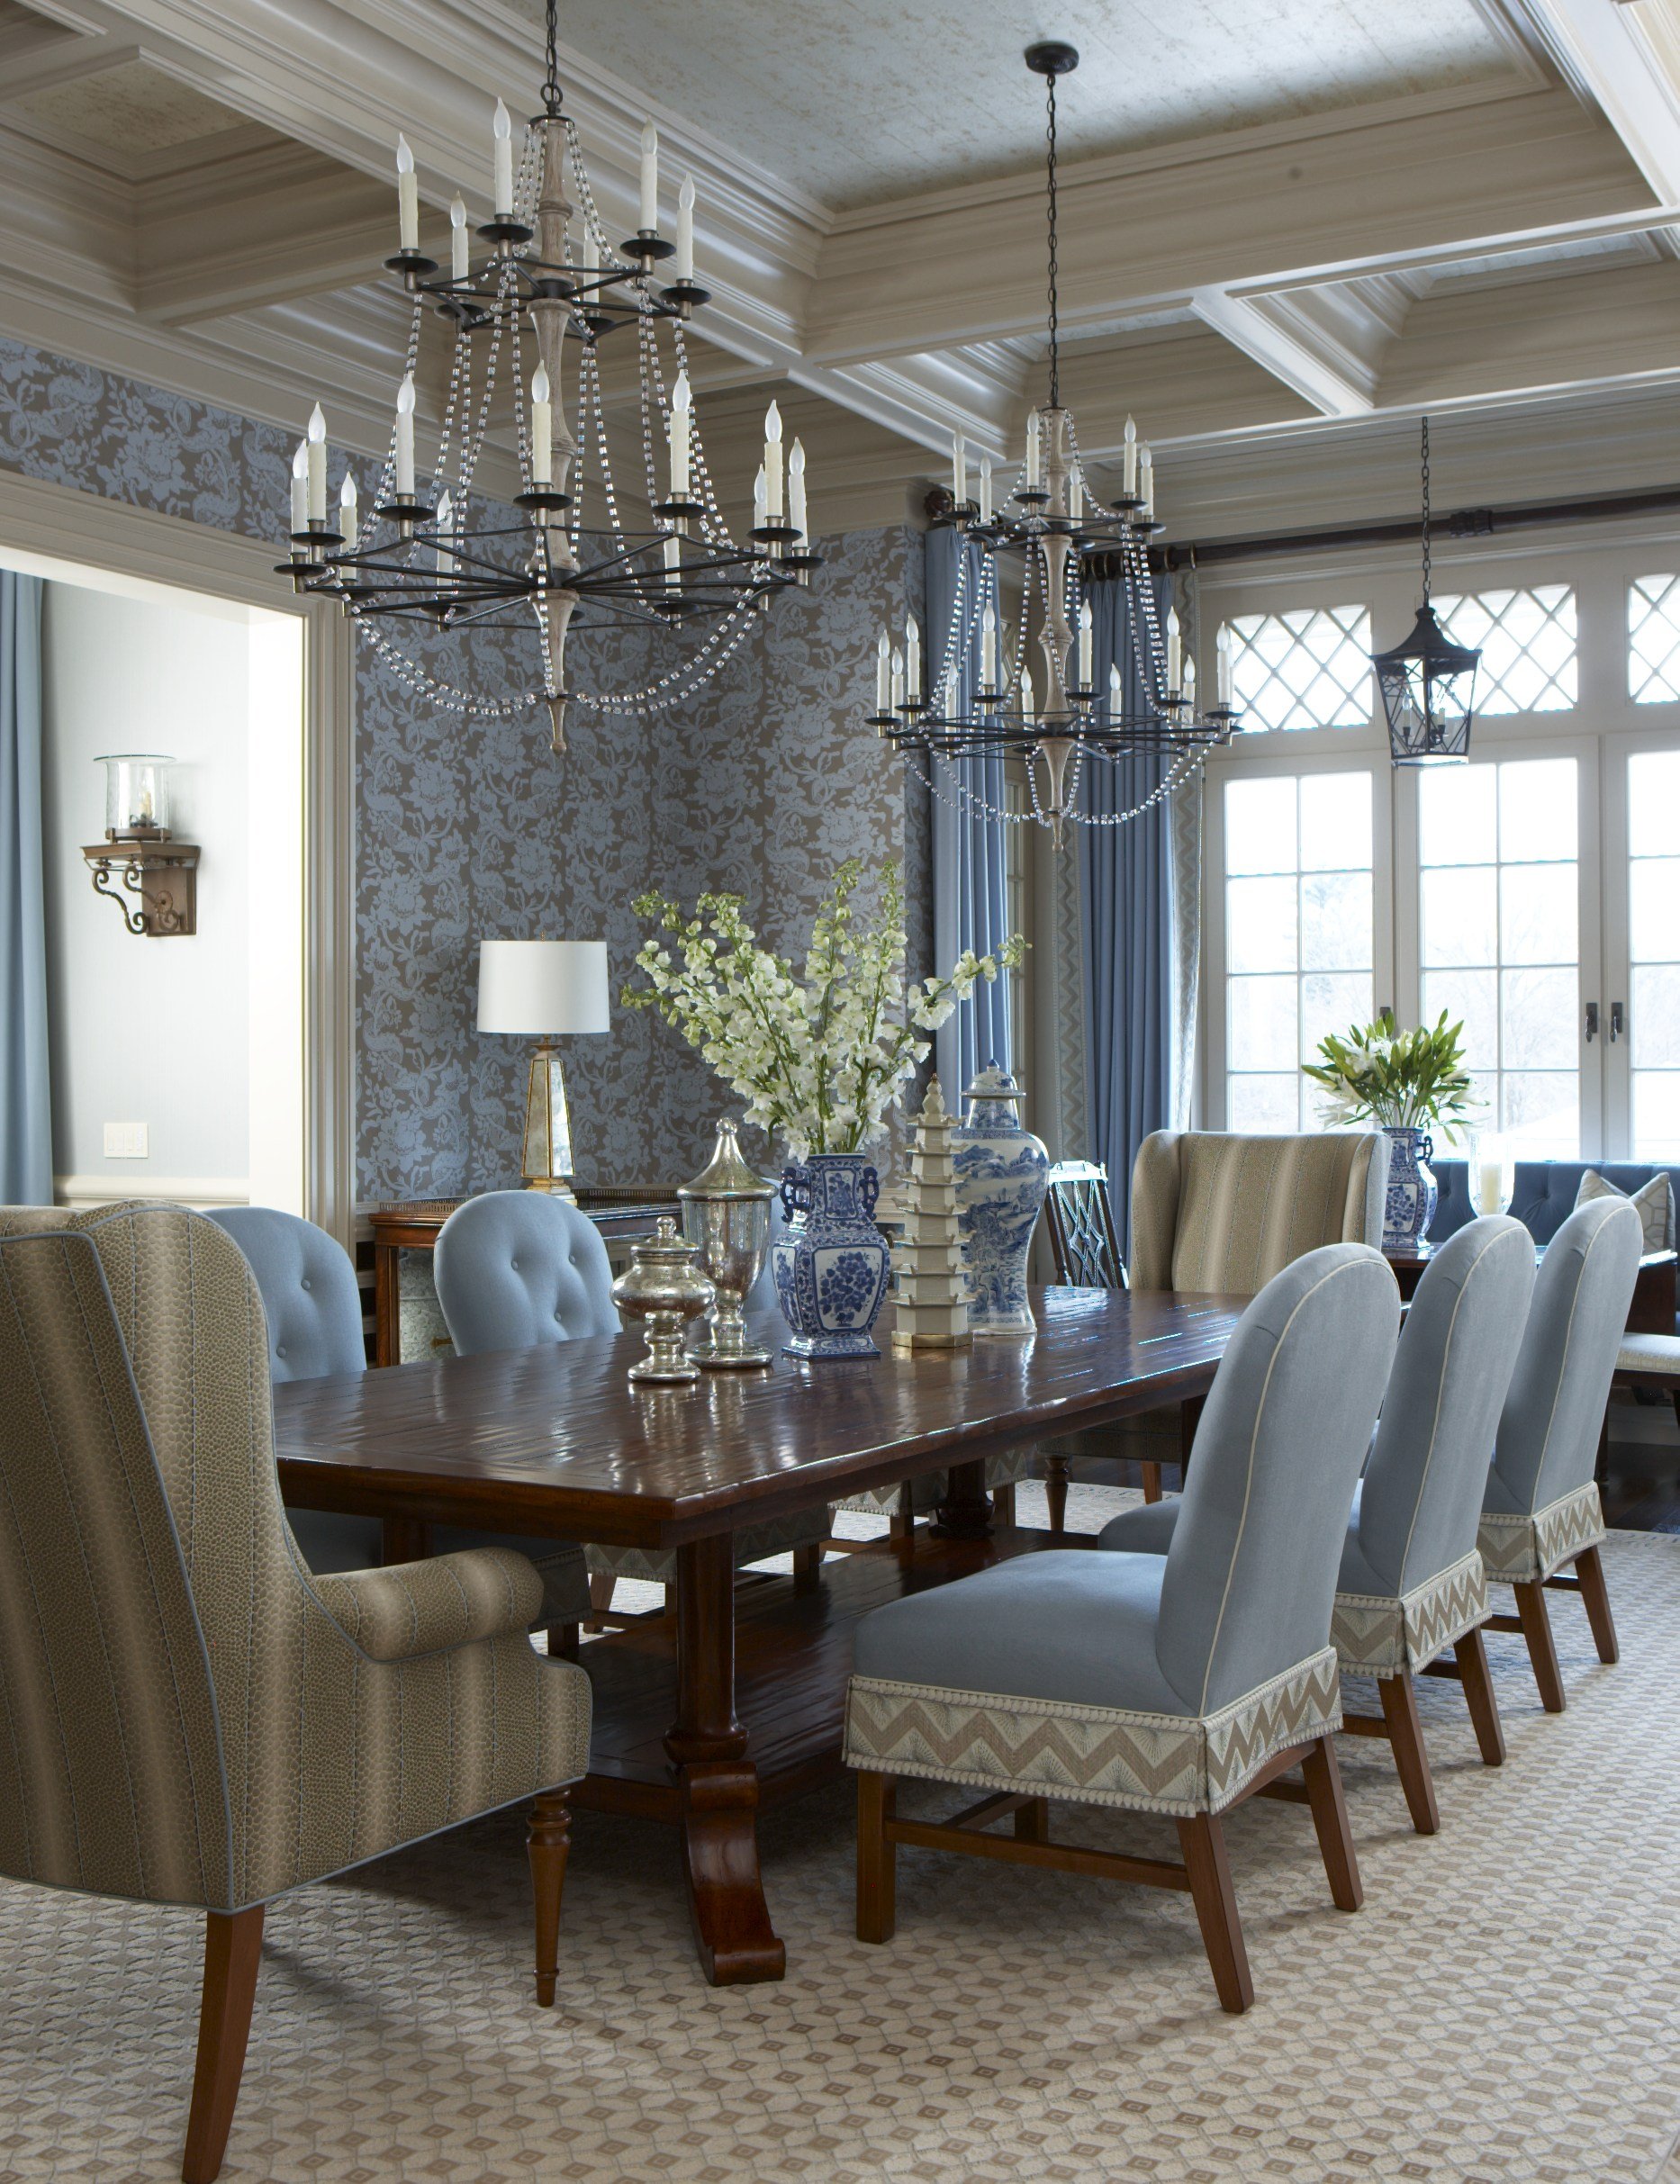 8-dining-table-candle-Chandelier-blue-wood-detailing-patterned-walls-jacobean-country-house-rinfret-interior-designs.jpg